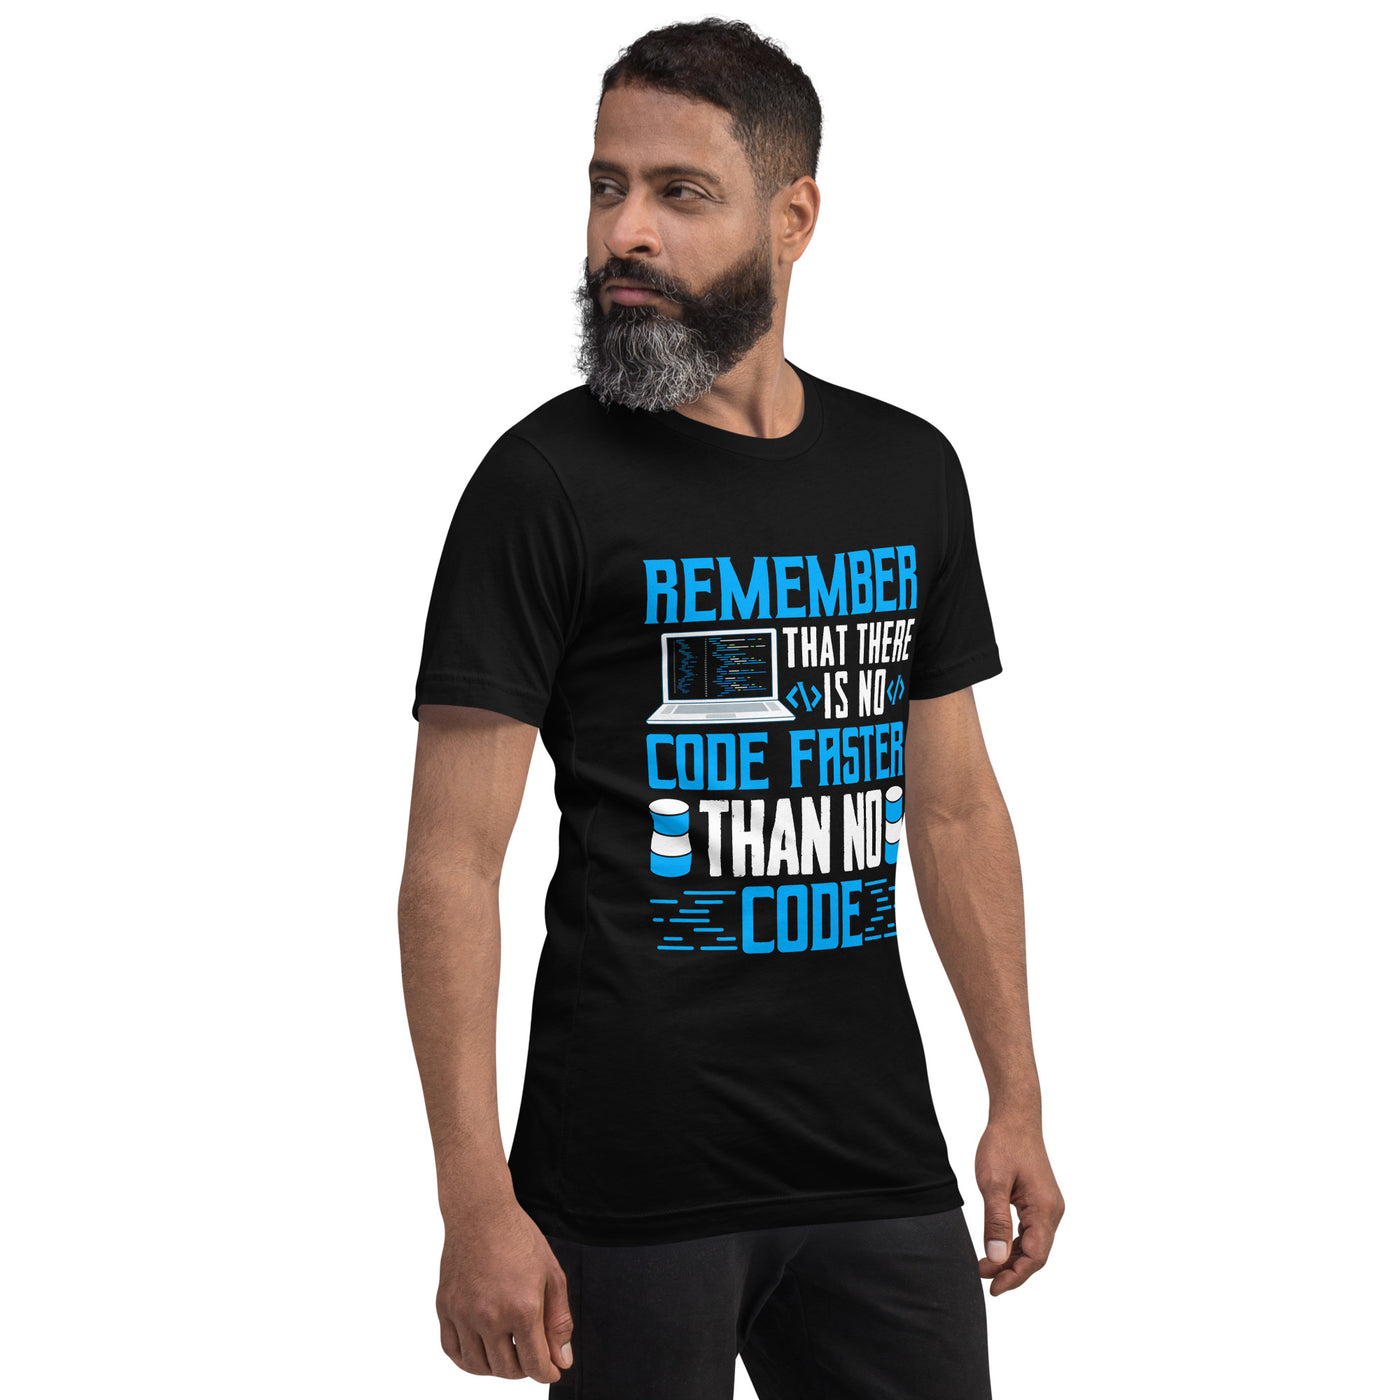 Remember! There is no code - Unisex t-shirt